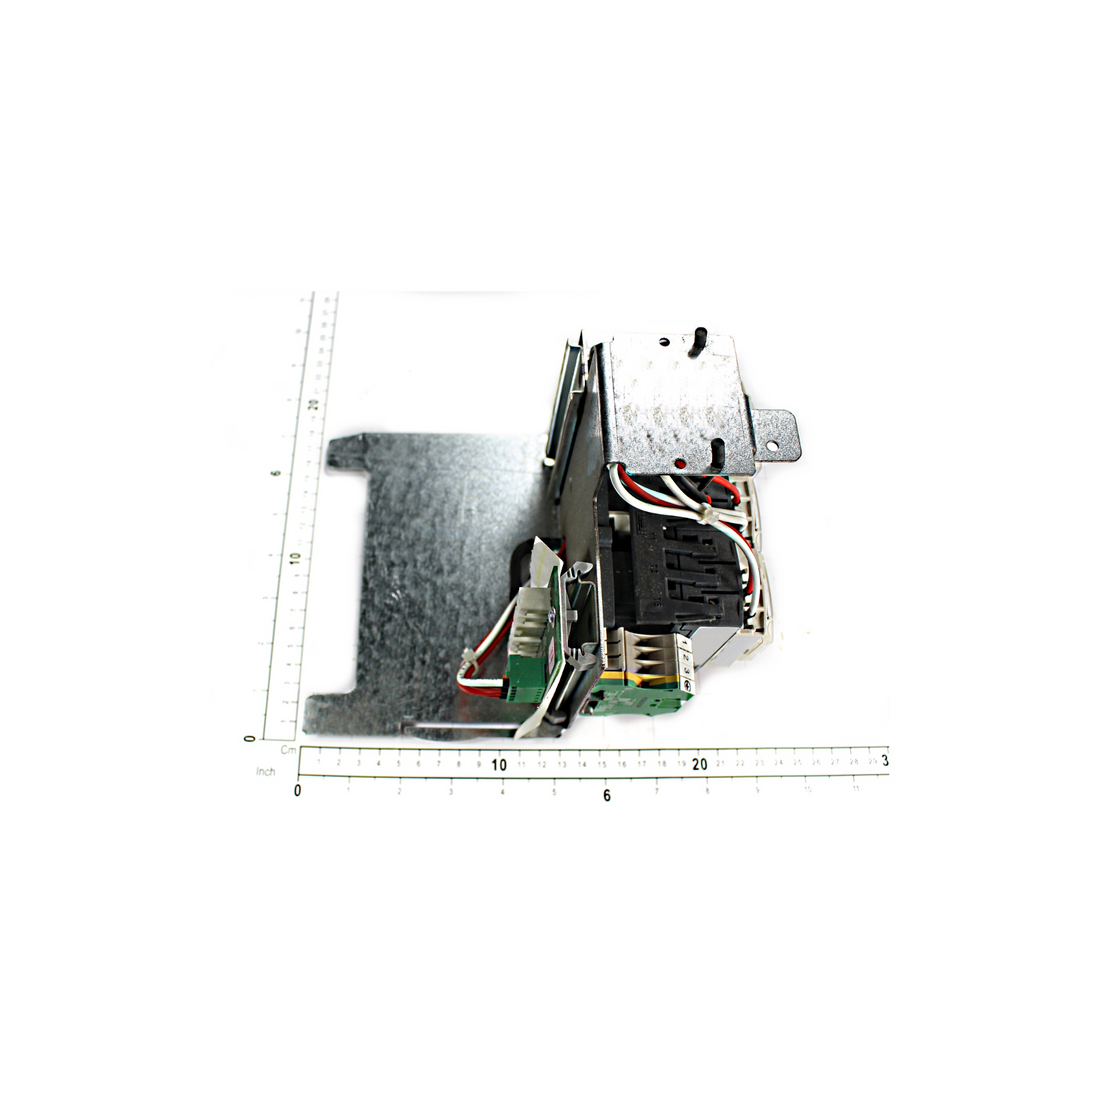 R&M Parts - Motor Control Board, Part Number: 3000007876